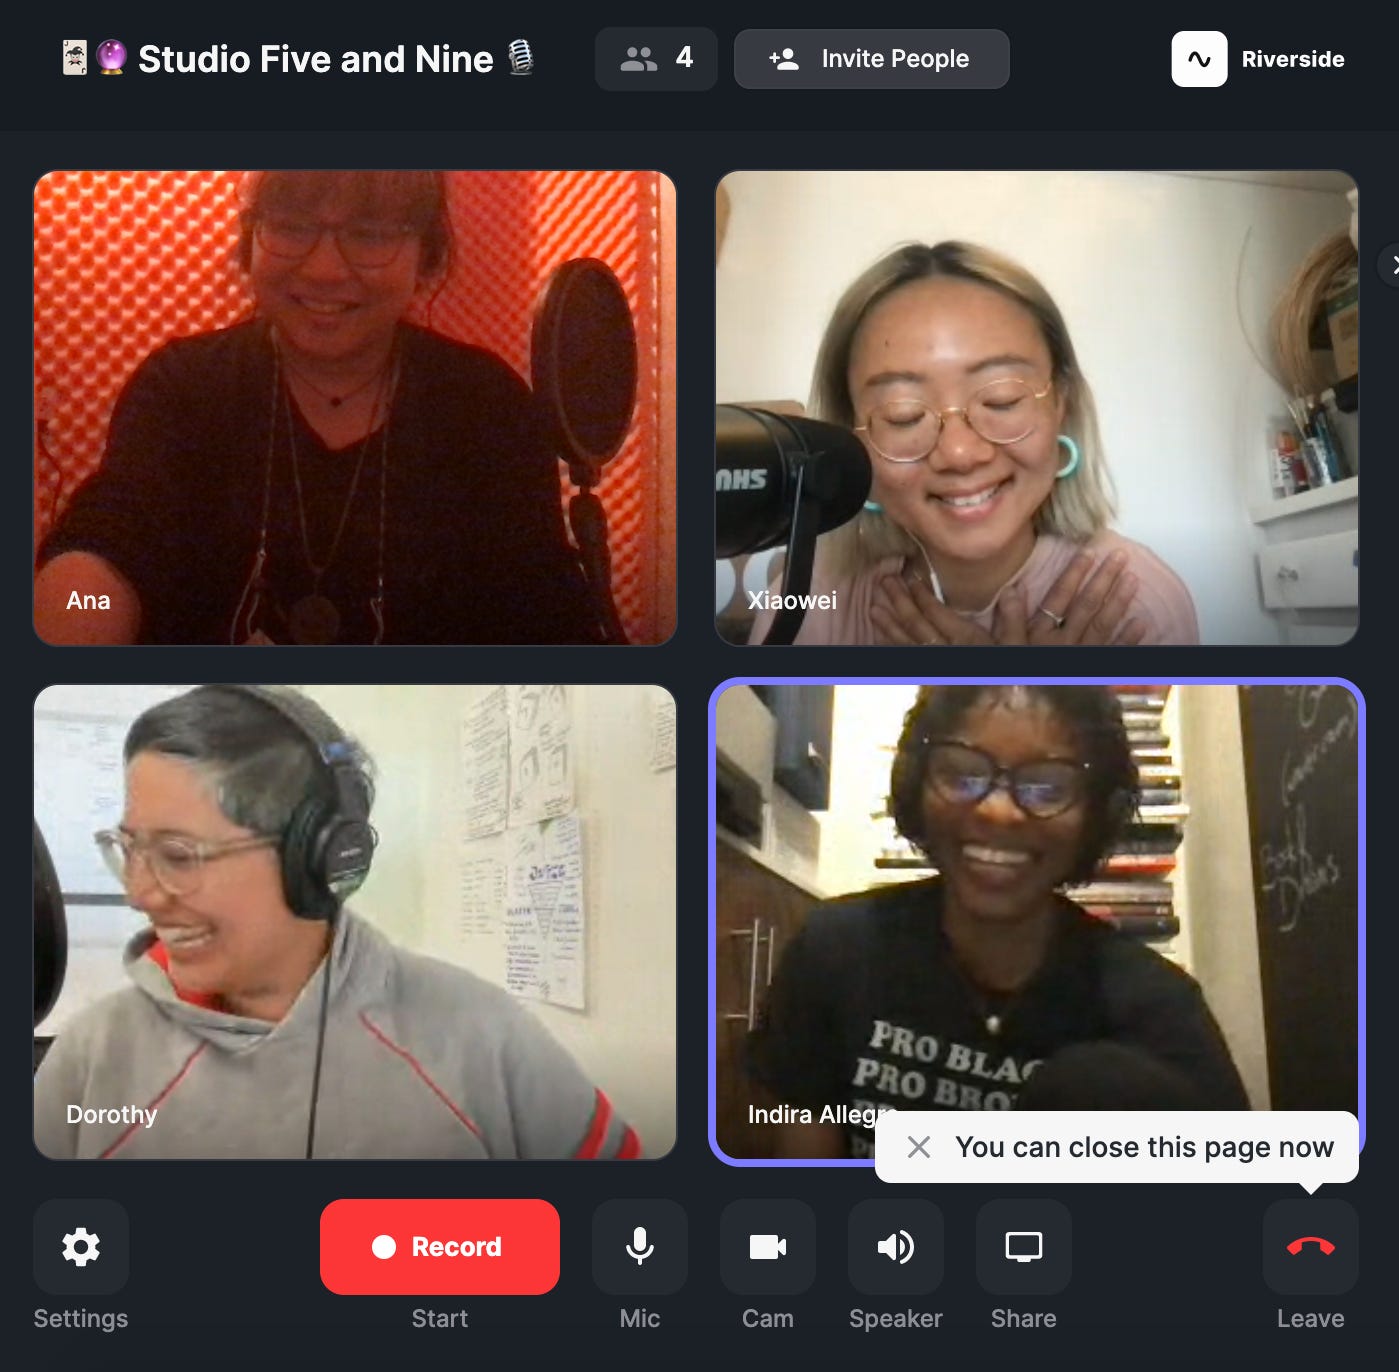 Four boxes of individuals, clockwise from the upper right: Xiaowei, Indira, Dorothy and Ana, smiling from their recording spaces. This is a screenshot of the riverside.fm user interface.